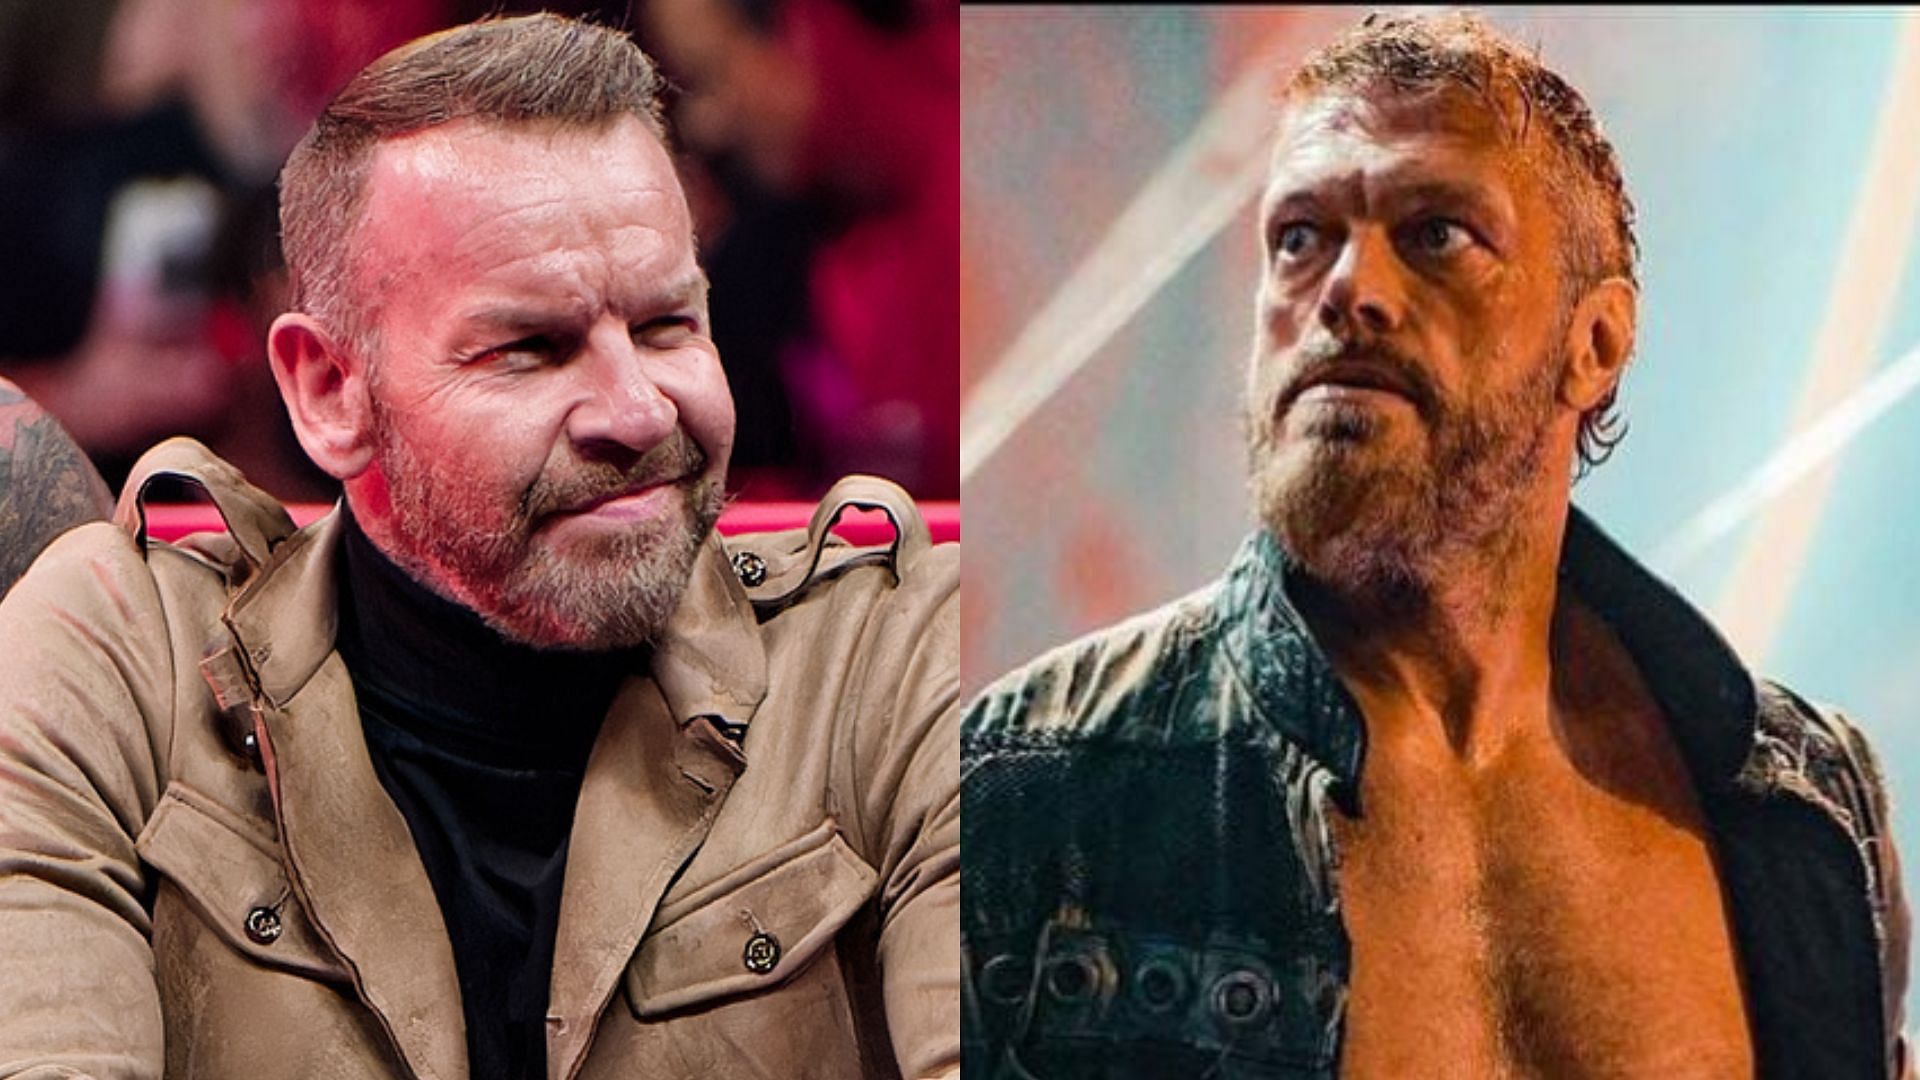 Christian Cage has addressed the Edge rumors